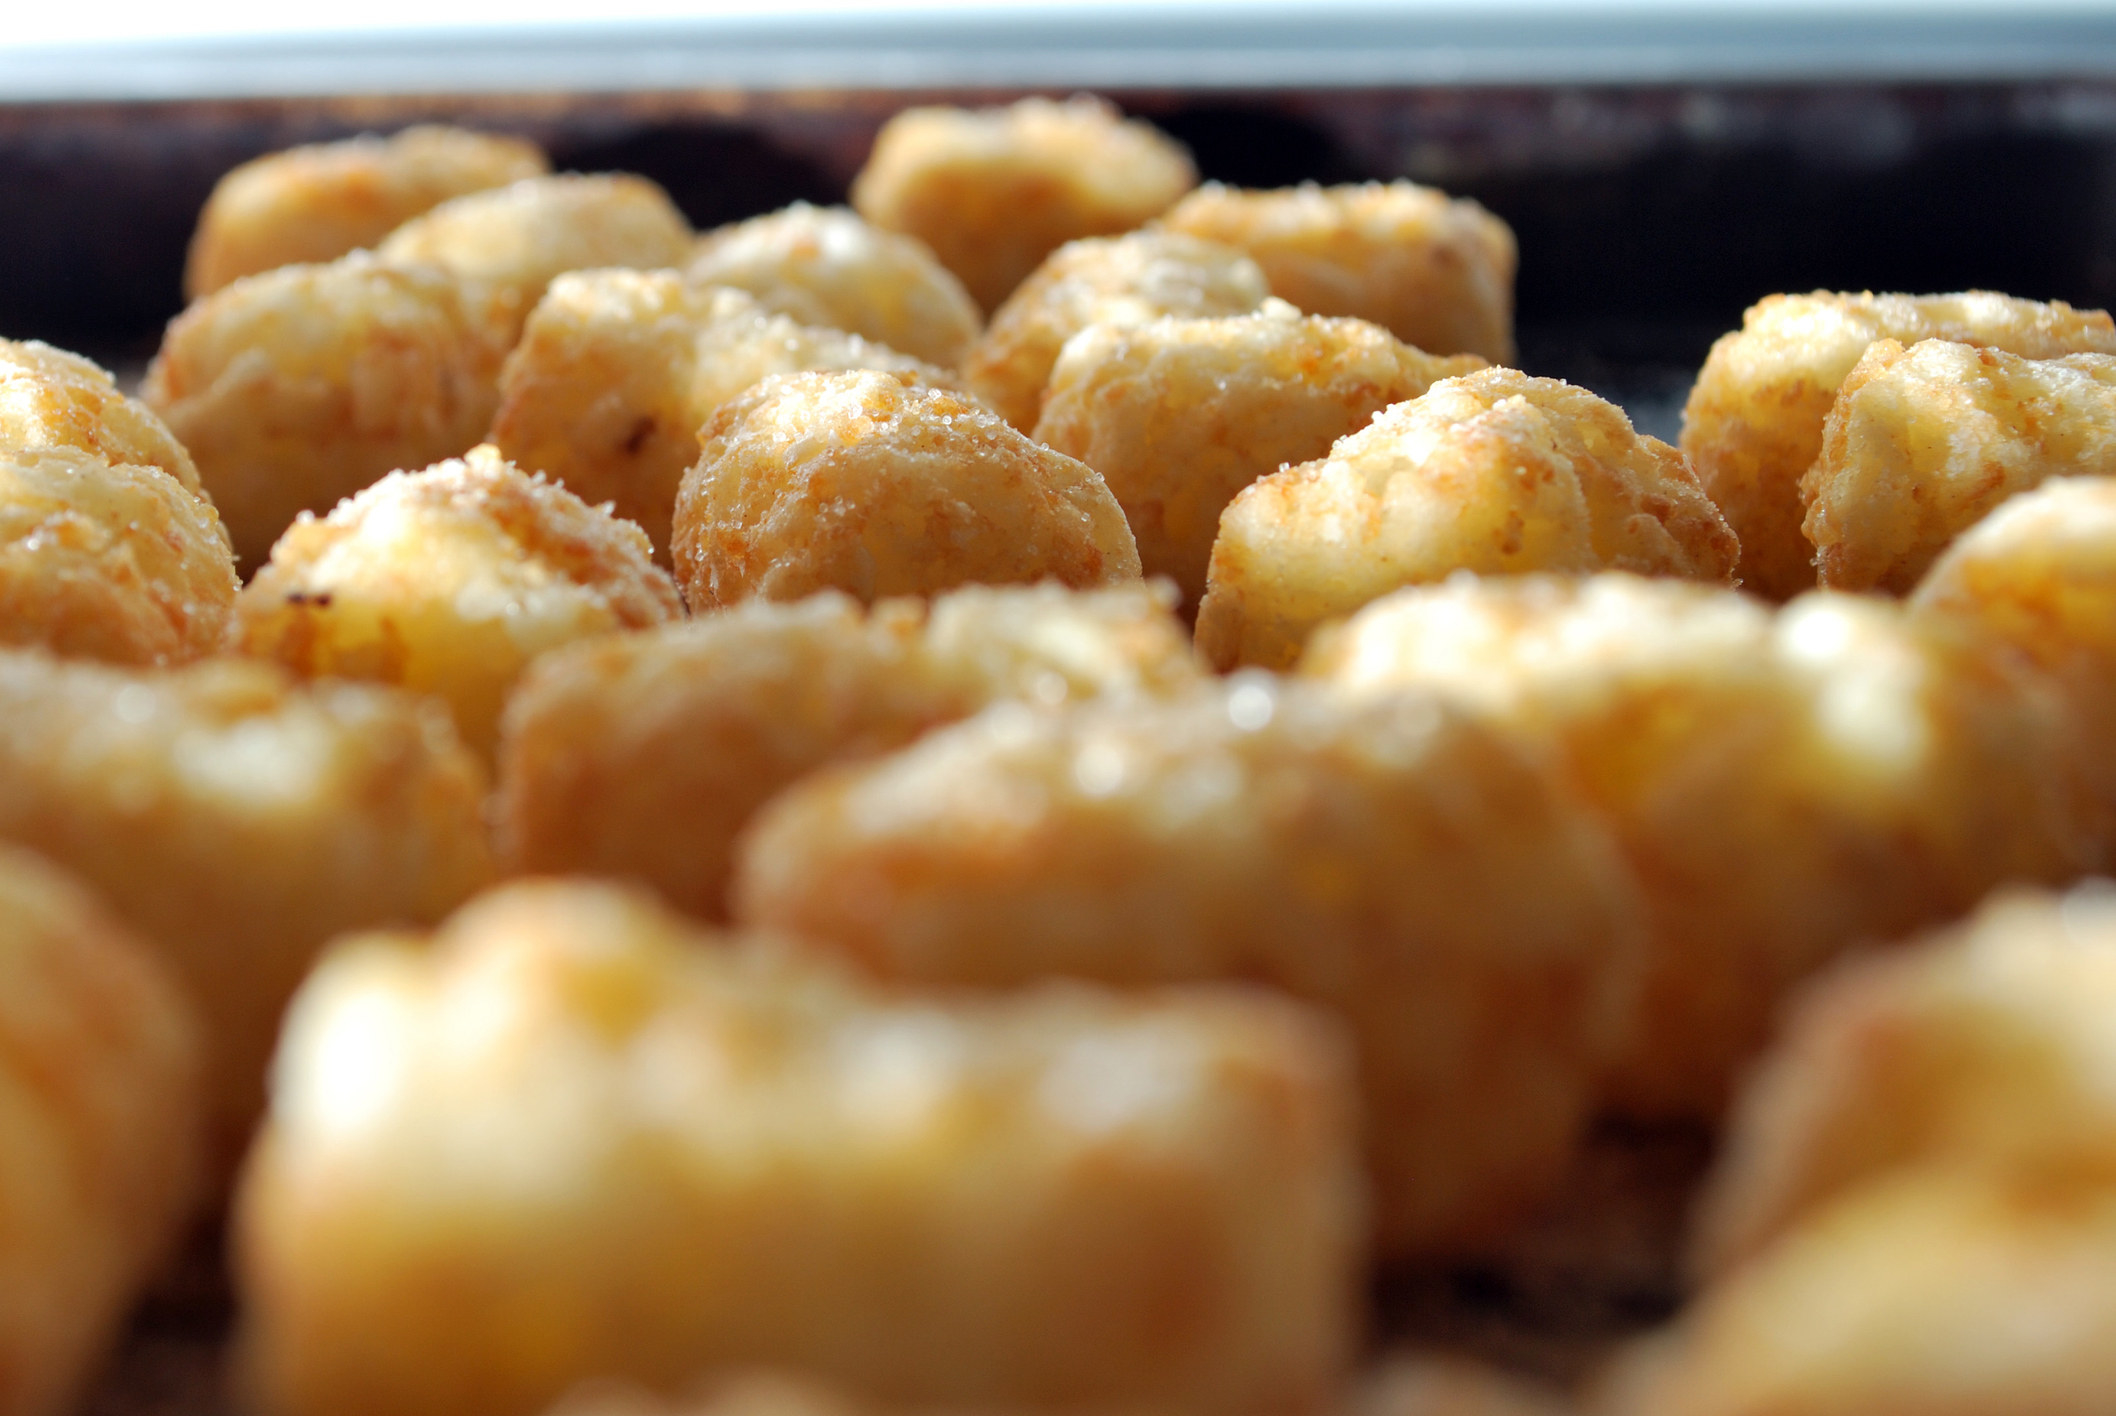 A close up of cooked tater tots.